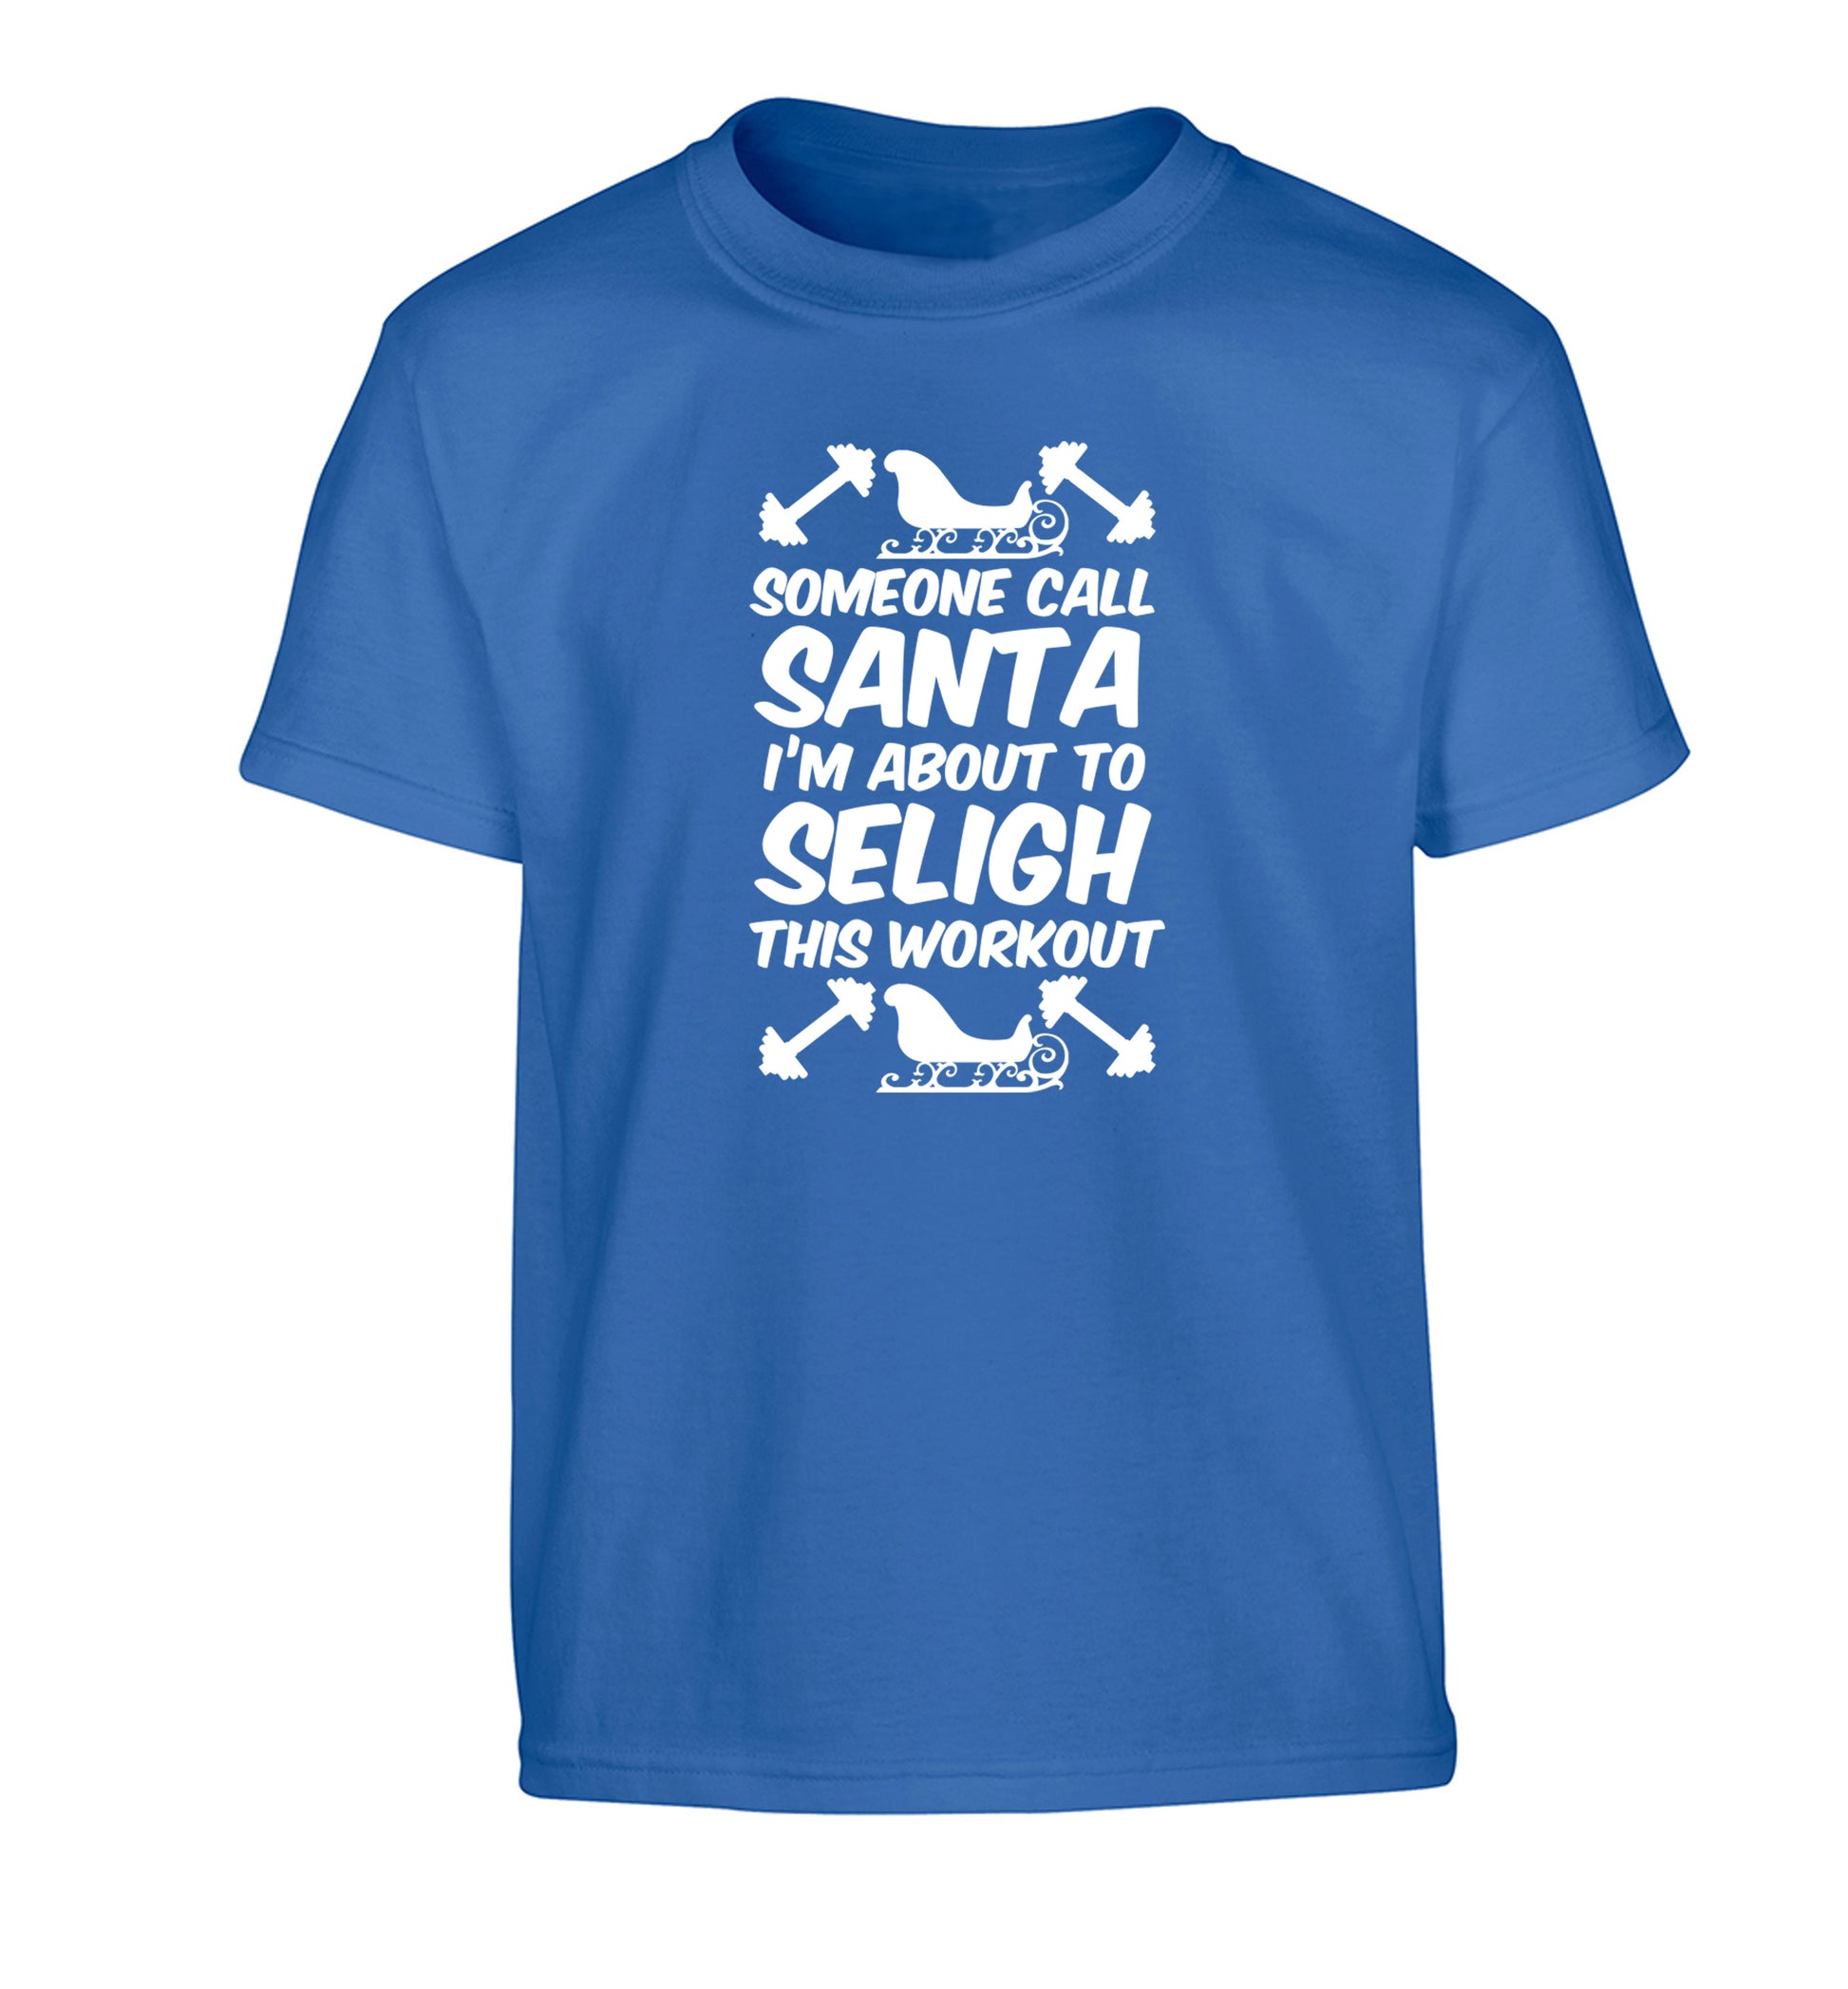 Someone call santa, I'm about to sleigh this workout Children's blue Tshirt 12-14 Years